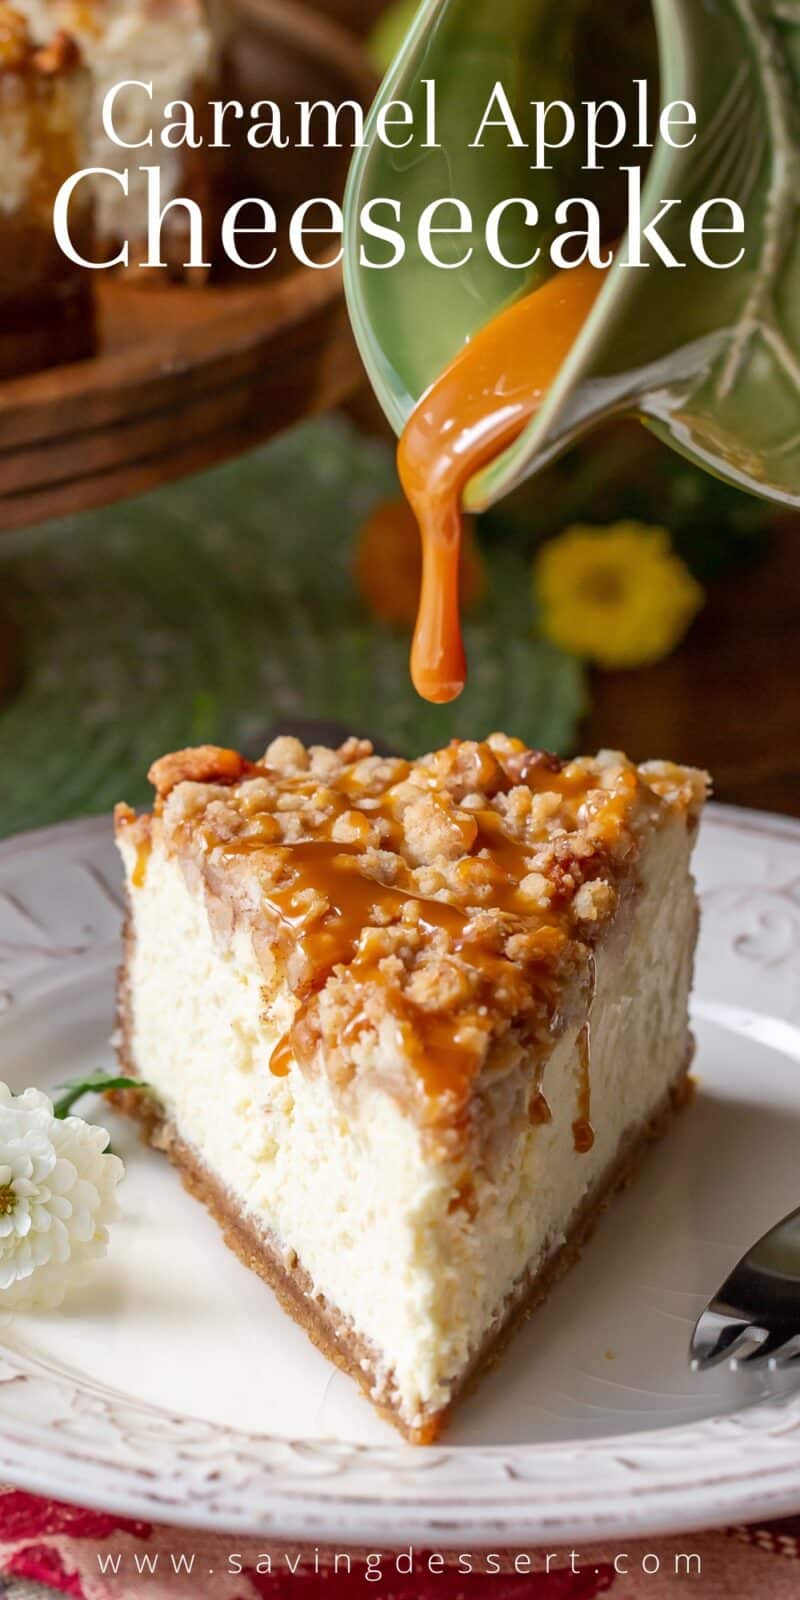 A slice of apple crumble cheesecake being drizzled with caramel sauce